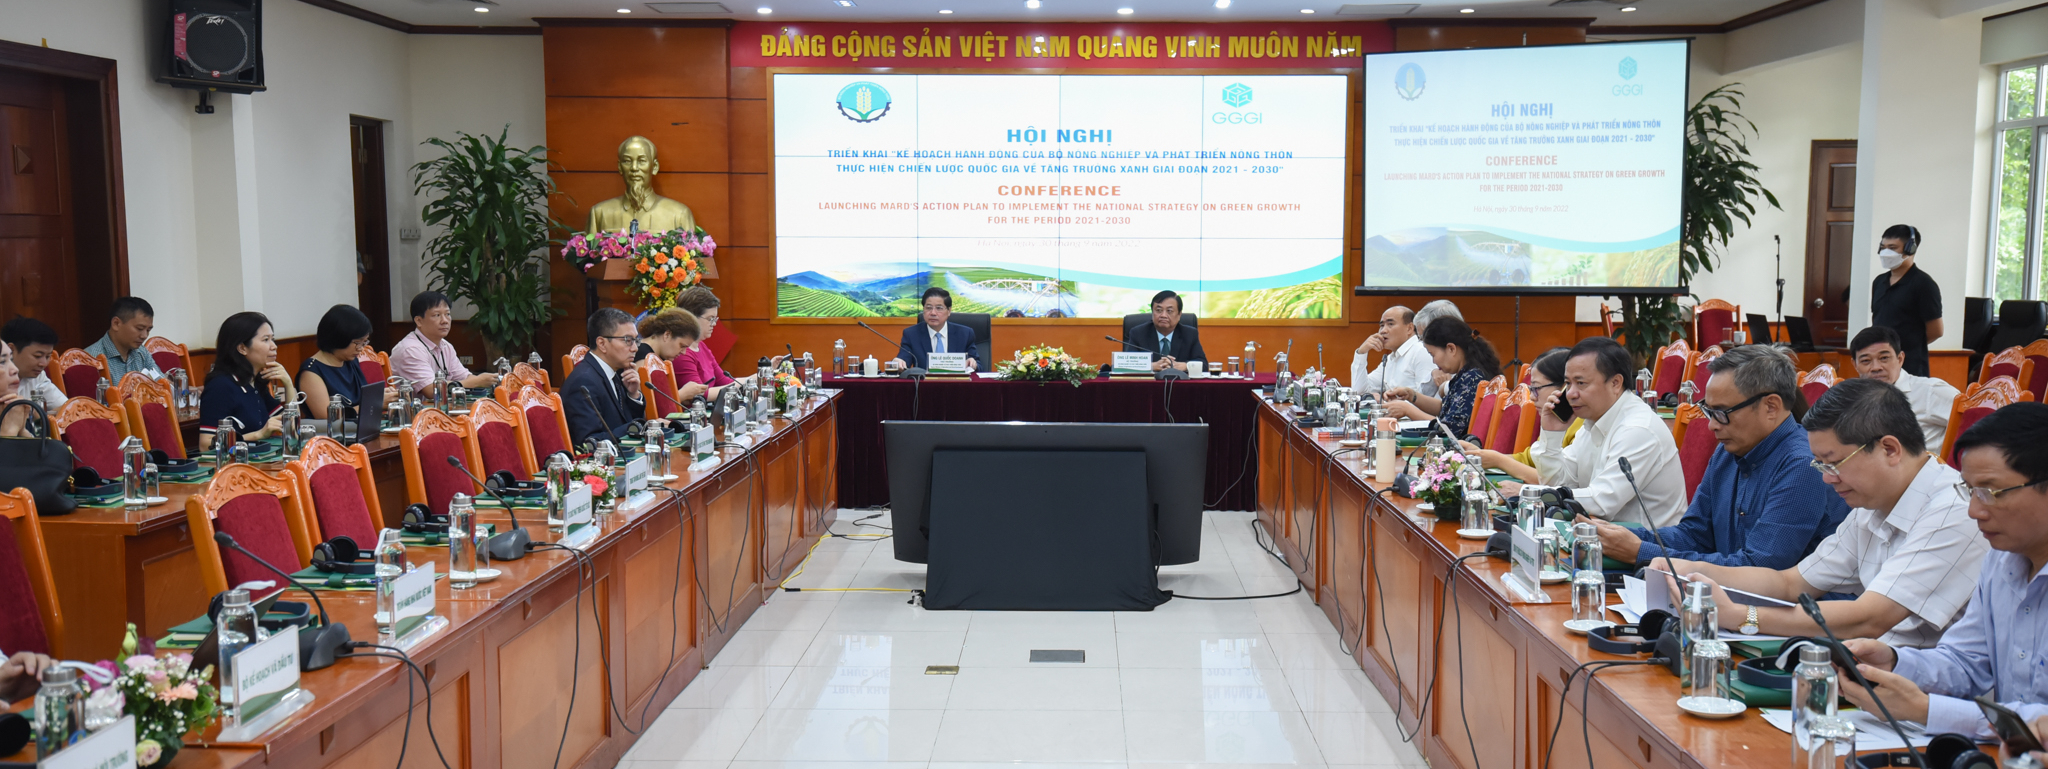 The Conference on the implementation of the MARD Action Plan upon carrying out the 2021-2030 National Strategy on Green Growth was held on September 30. Photo: Tung Dinh.